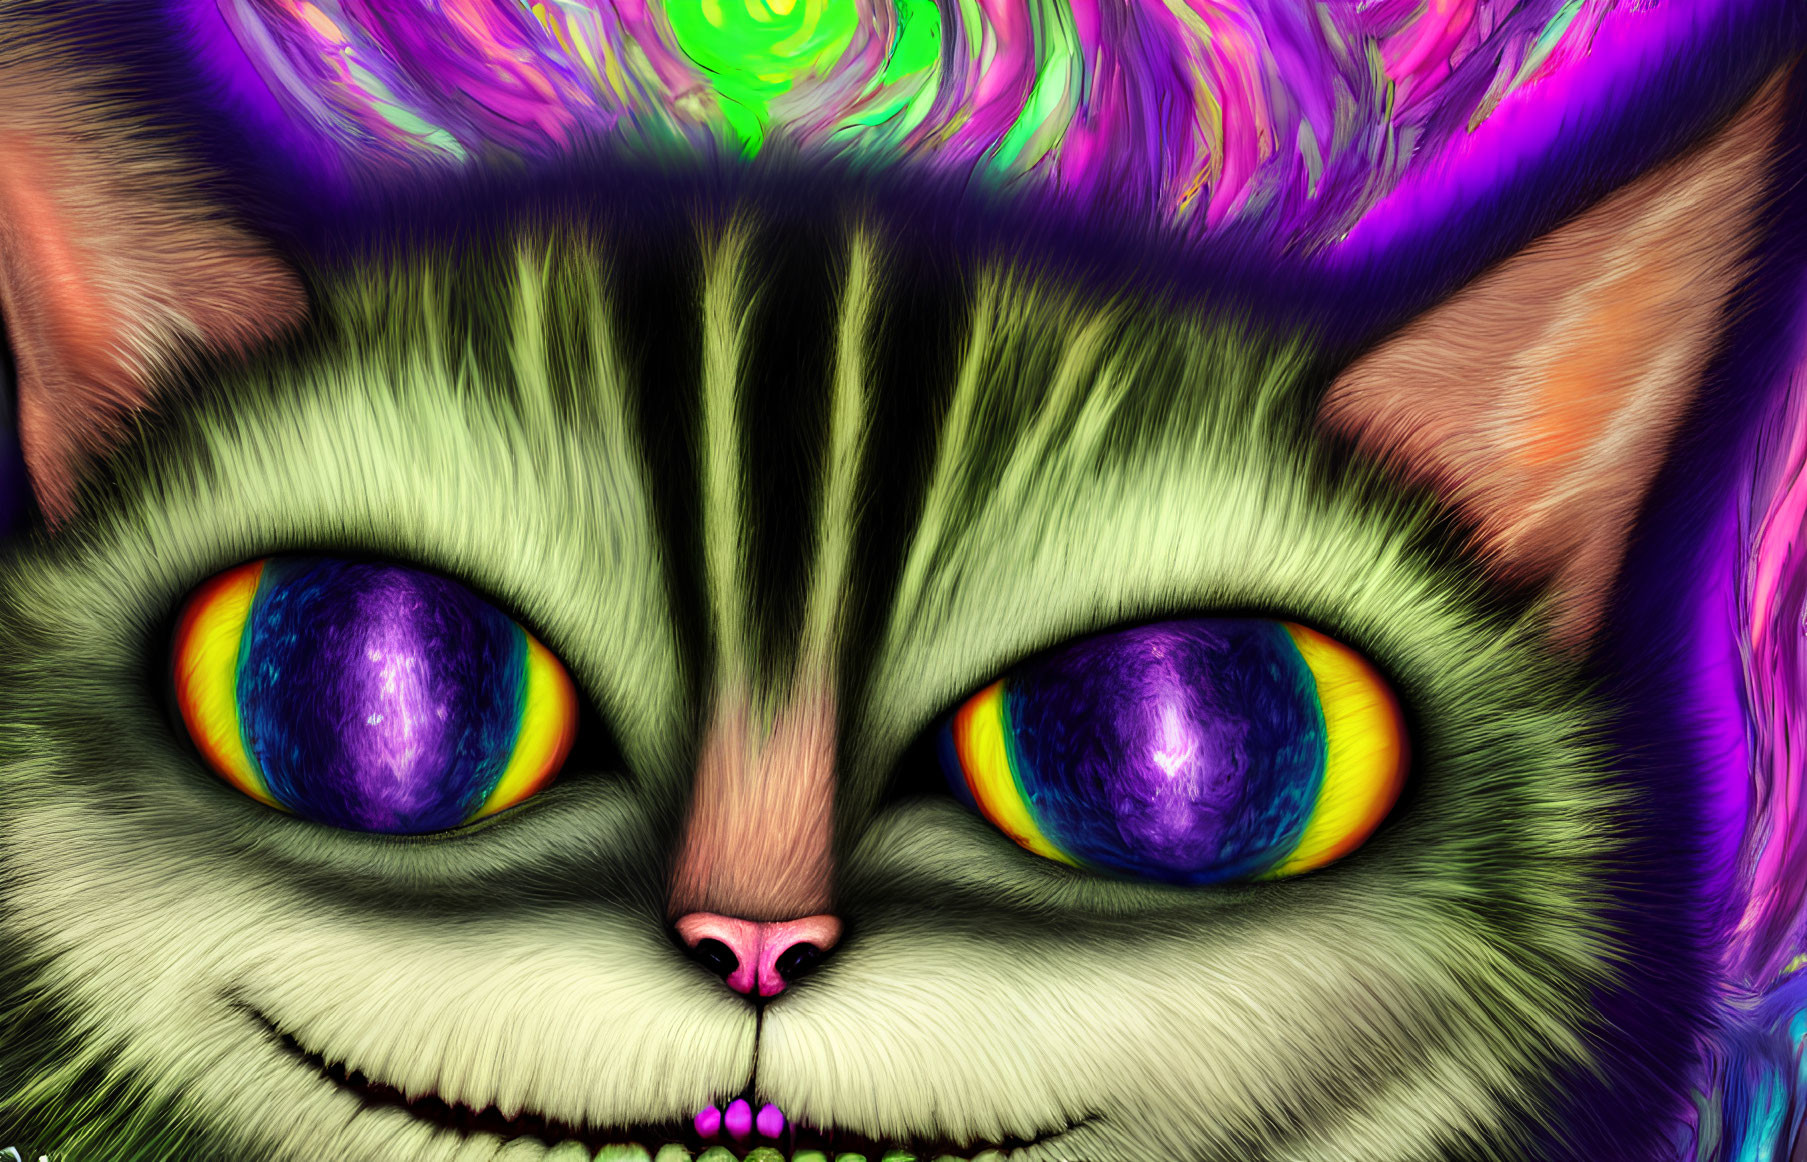 Colorful stylized cat with galaxy swirl eyes in close-up view